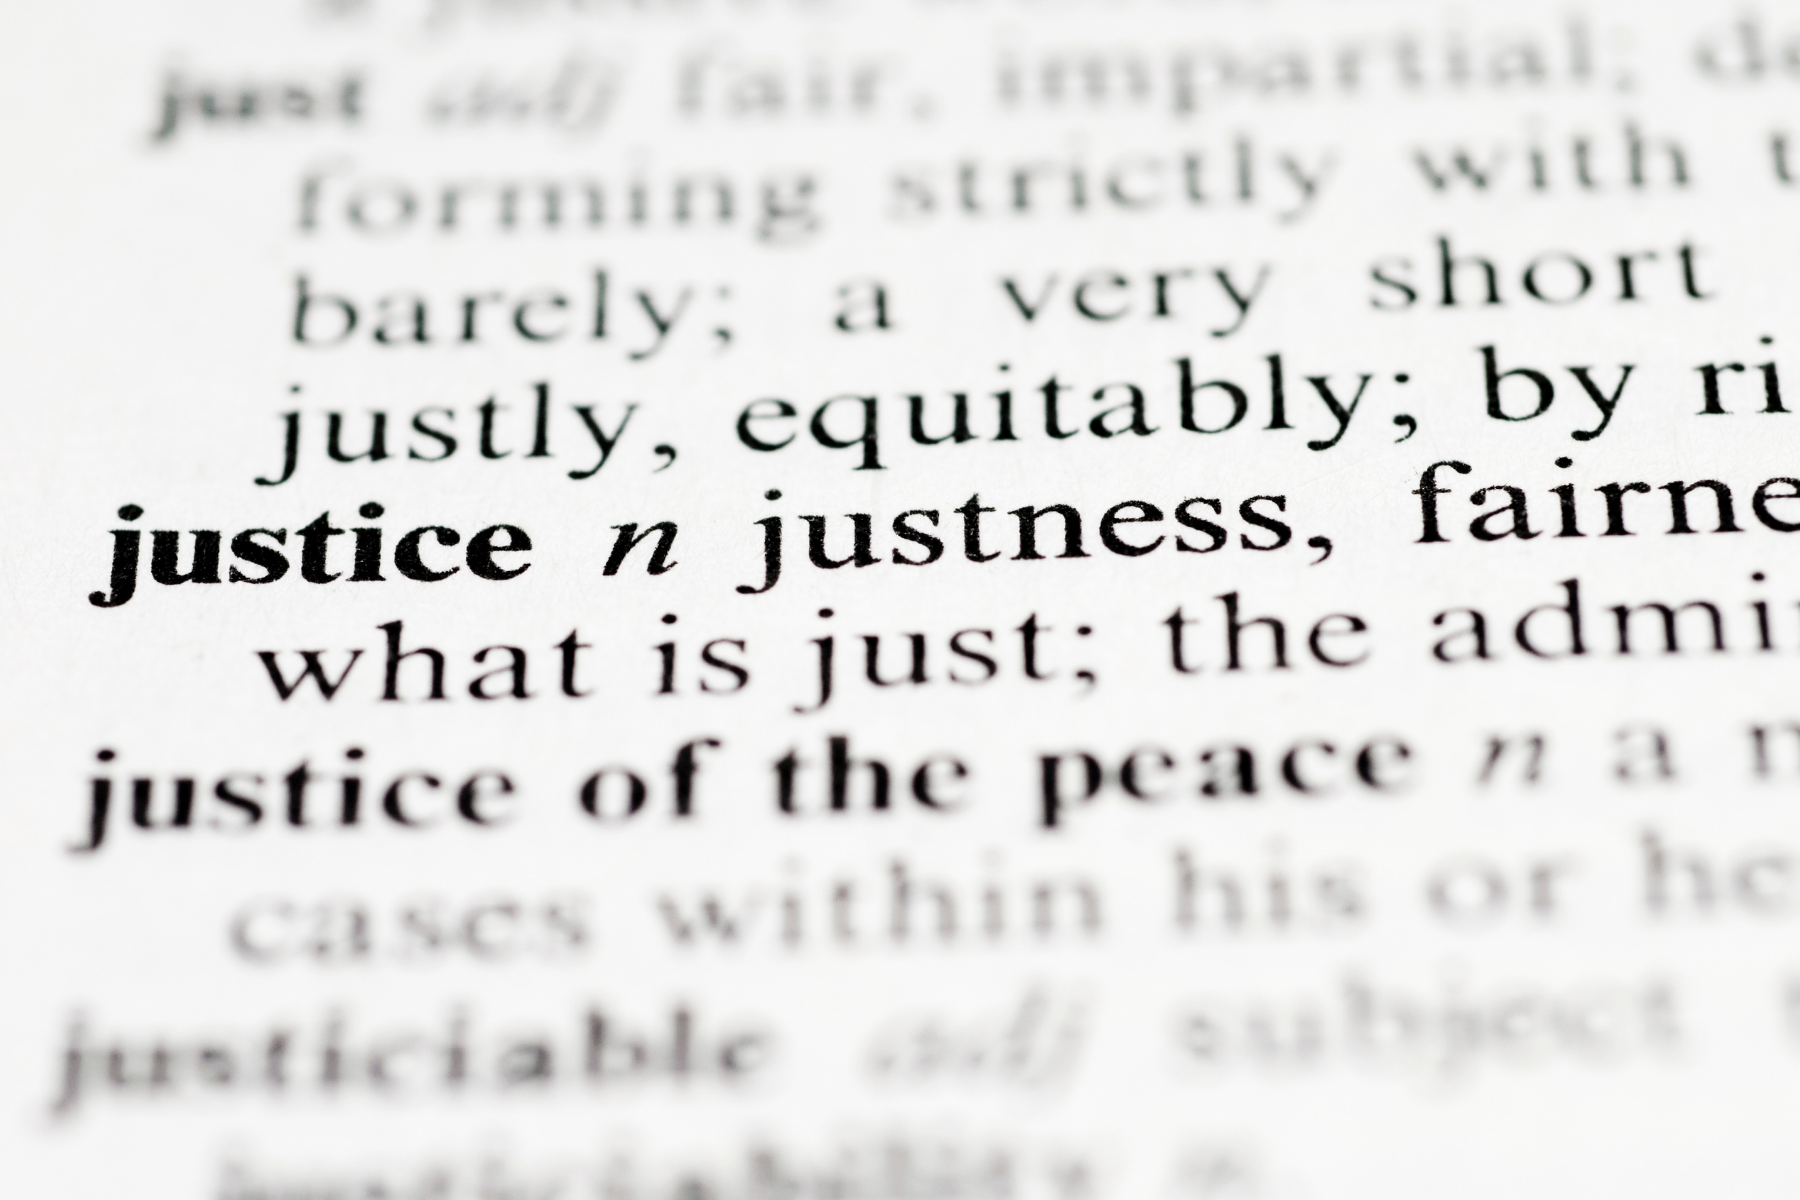 Meaning of justice (text)